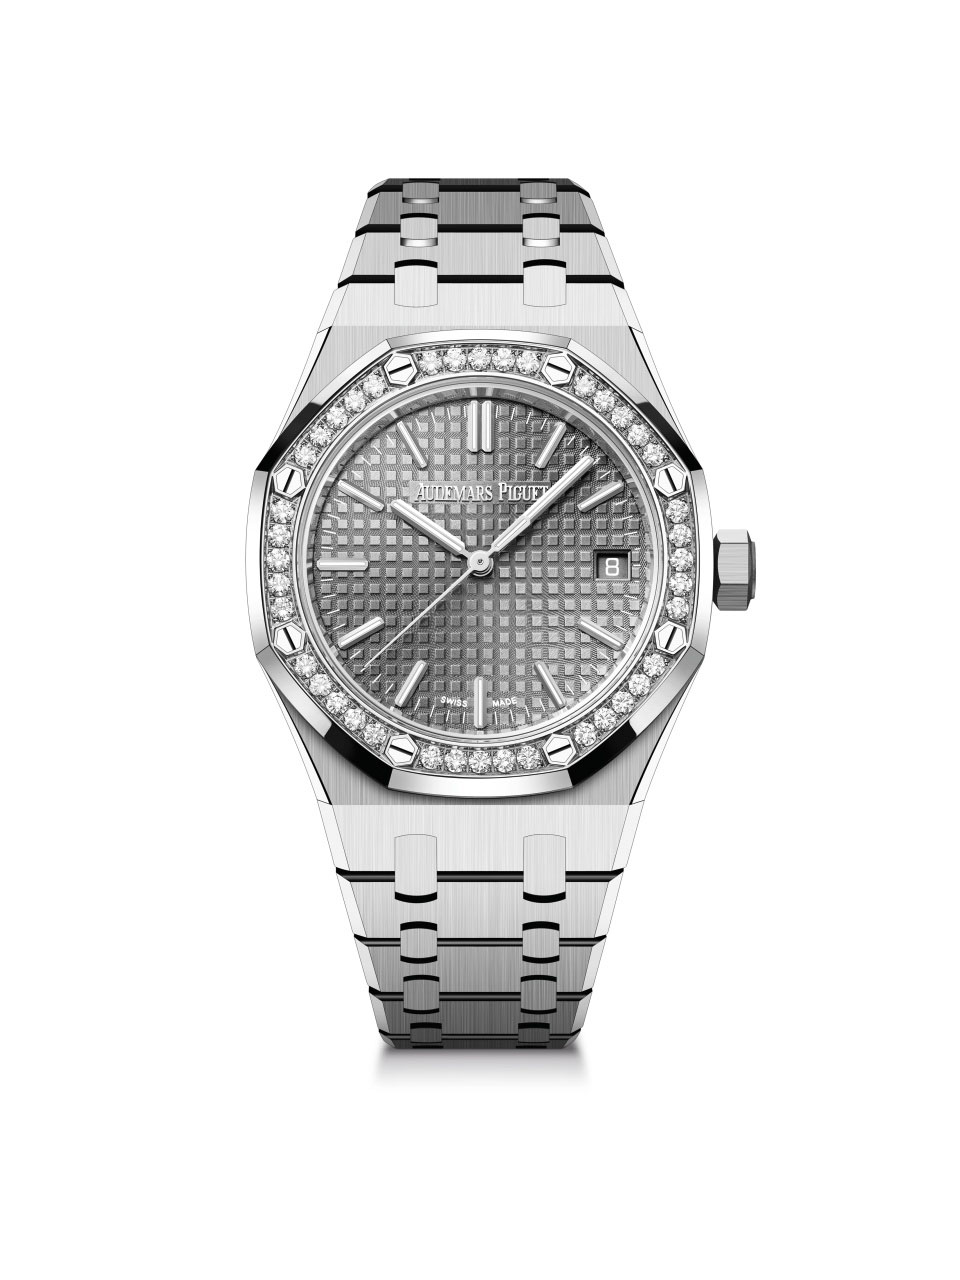 Royal Oak Selfwinding / 37mm; stainless steel case, bezel set with 40 brilliant-cut diamonds (~0.92 carats) with grey dial (15551ST.ZZ.1356ST.03)